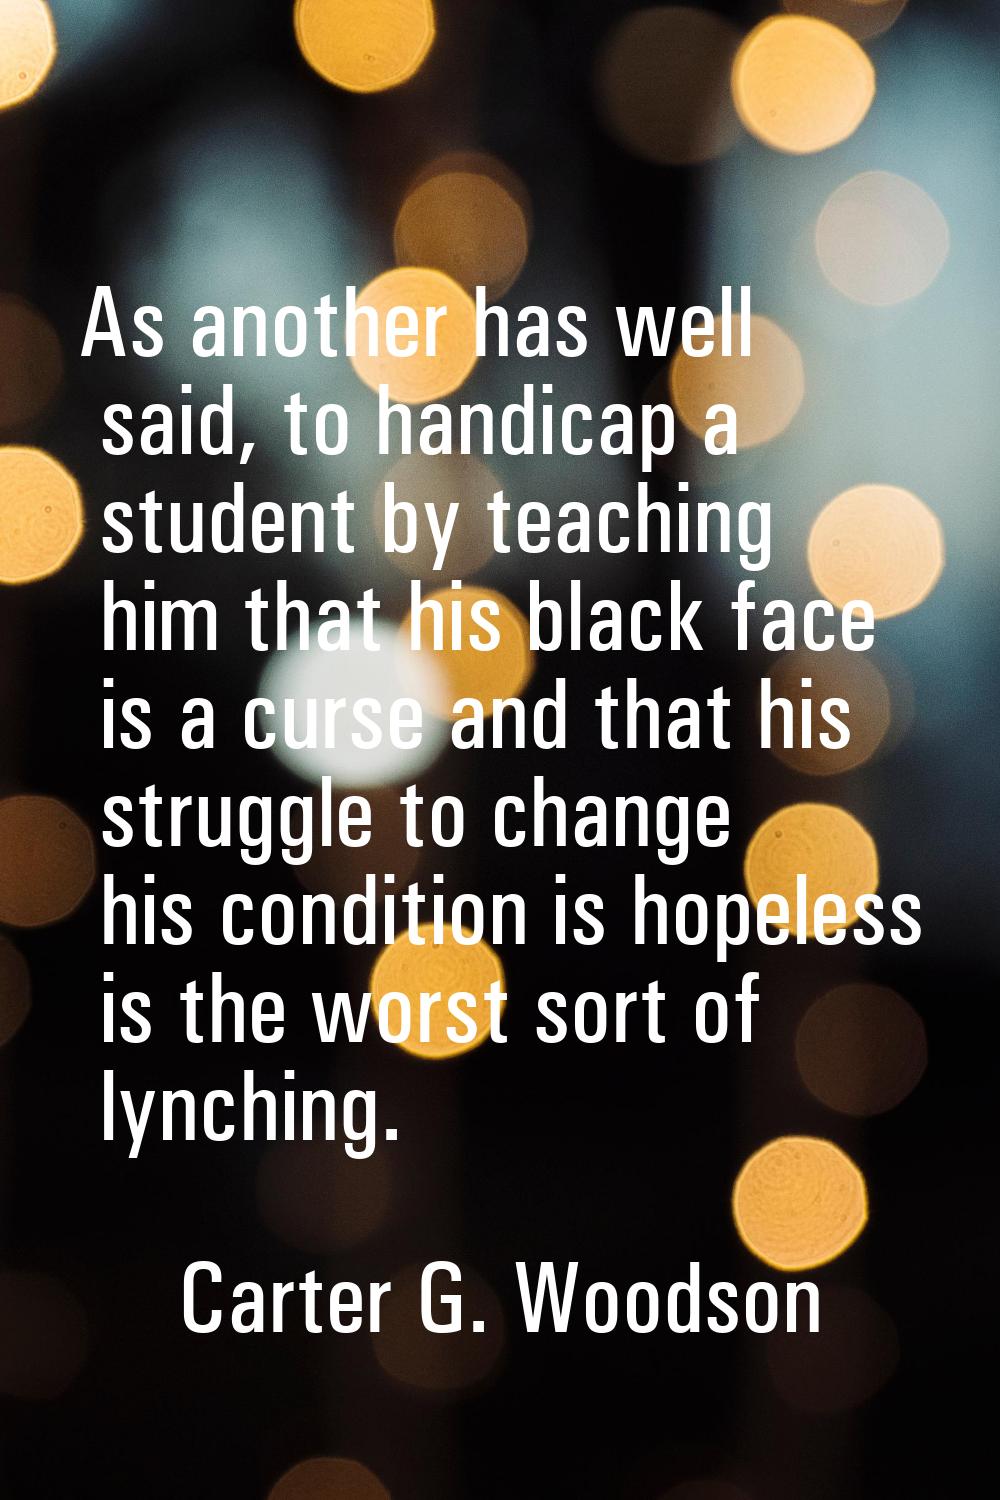 As another has well said, to handicap a student by teaching him that his black face is a curse and 